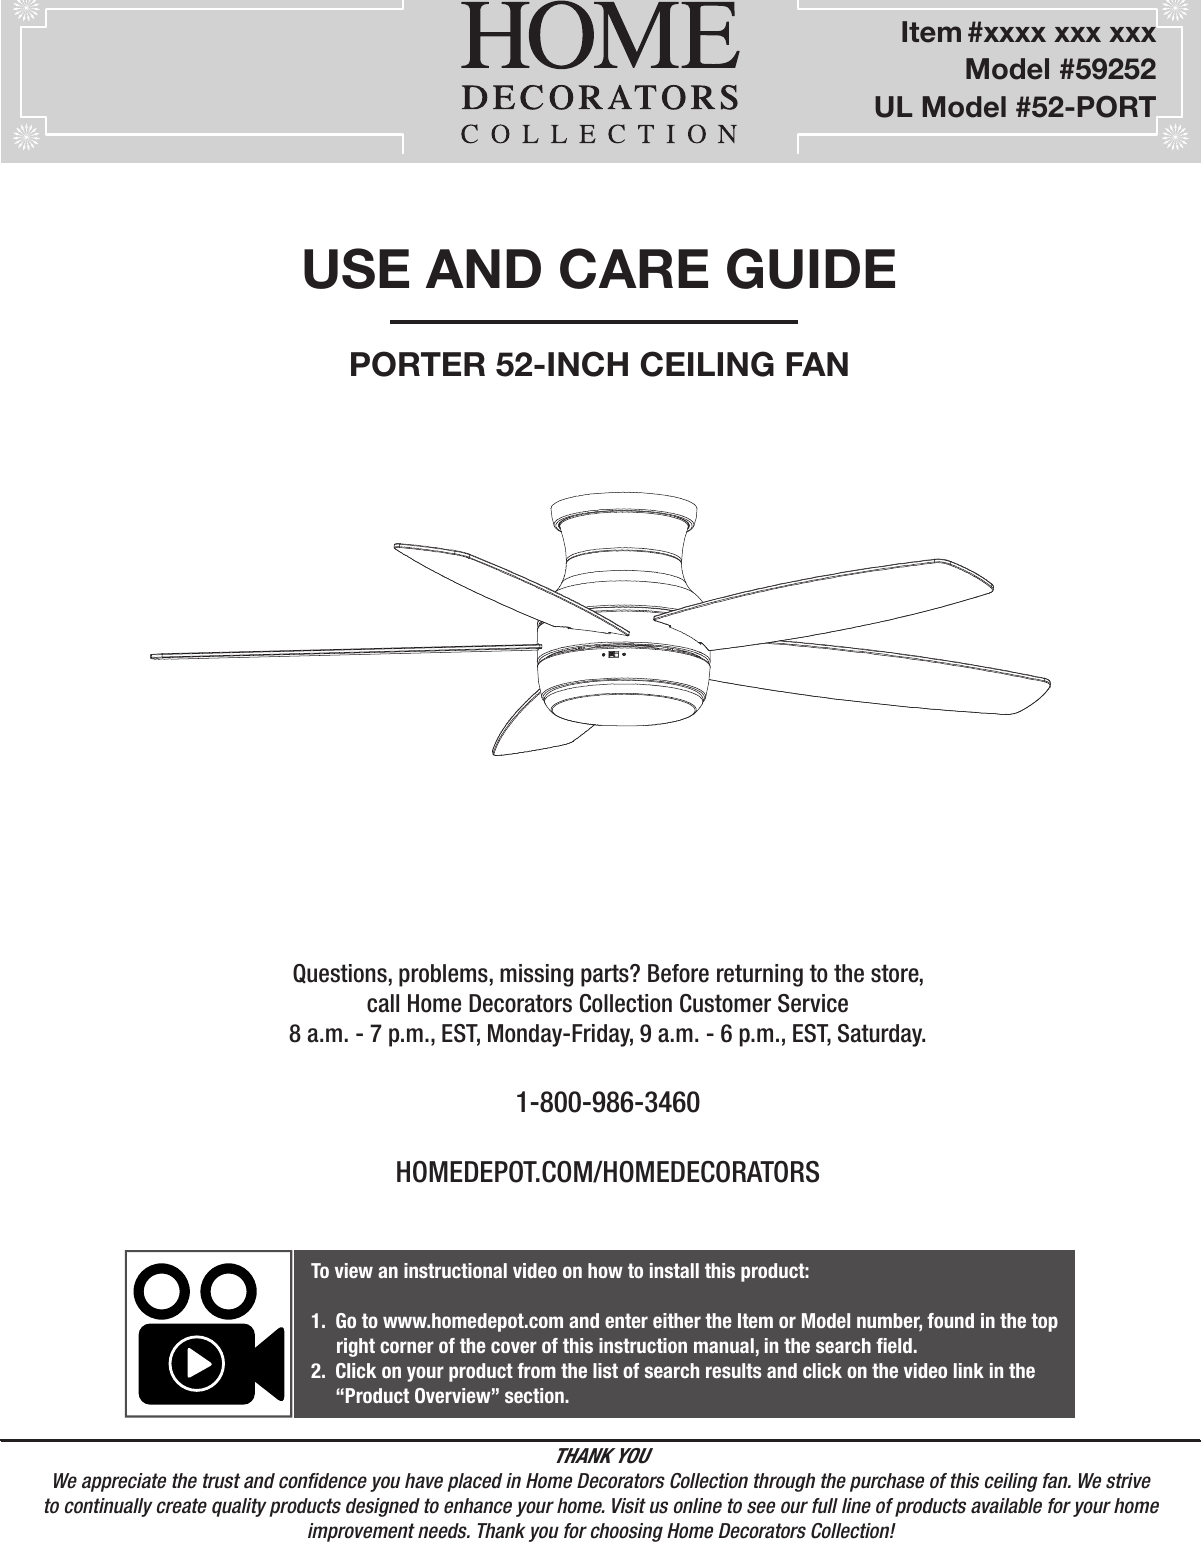 USE AND CARE GUIDEPORTER 52-INCH CEILING FANQuestions, problems, missing parts? Before returning to the store,call Home Decorators Collection Customer Service8 a.m. - 7 p.m., EST, Monday-Friday, 9 a.m. - 6 p.m., EST, Saturday.1-800-986-3460HOMEDEPOT.COM/HOMEDECORATORSTHANK YOUWe appreciate the trust and condence you have placed in Home Decorators Collection through the purchase of this ceiling fan. We strive to continually create quality products designed to enhance your home. Visit us online to see our full line of products available for your home improvement needs. Thank you for choosing Home Decorators Collection!          Item #xxxx xxx xxx      Model #59252UL Model #52-PORTTo view an instructional video on how to install this product:1.  Go to www.homedepot.com and enter either the Item or Model number, found in the top     right corner of the cover of this instruction manual, in the search eld.2.  Click on your product from the list of search results and click on the video link in the     “Product Overview” section.